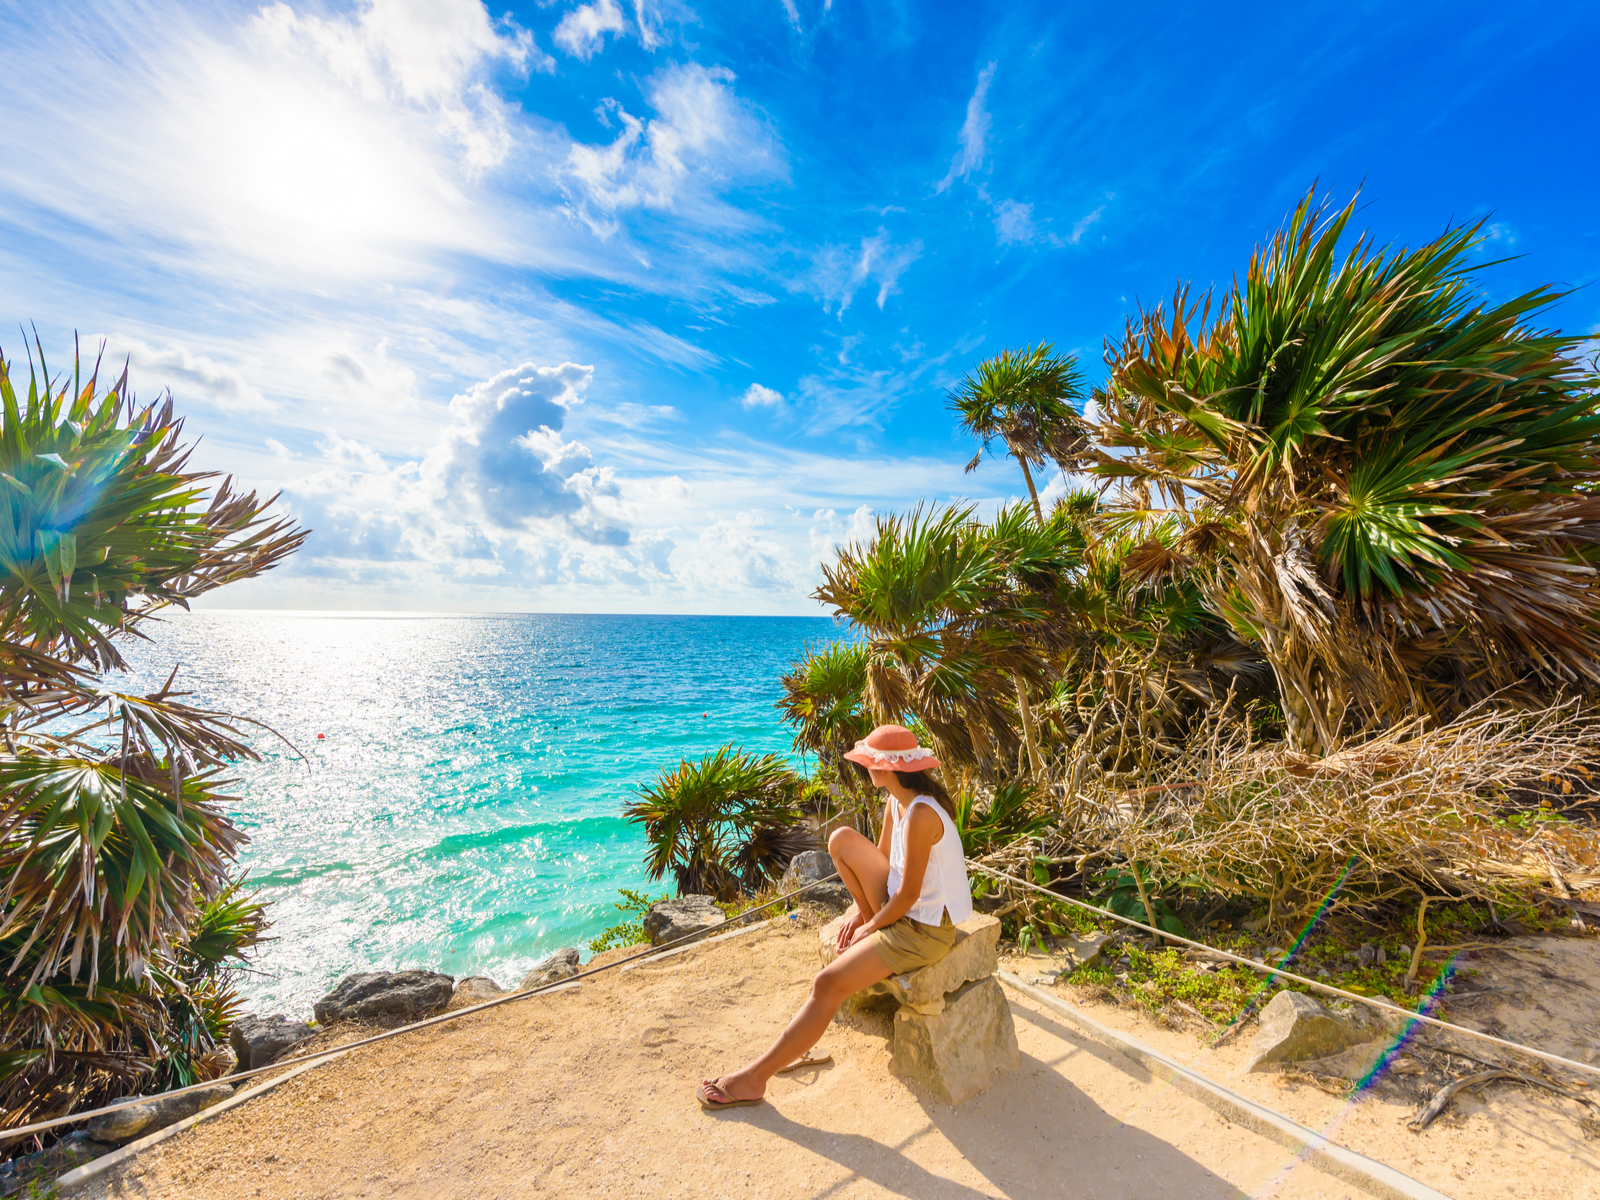 Woman seeing the ruins in Tulum, one of the things to do while staying at the best all-inclusive resorts in Cancun